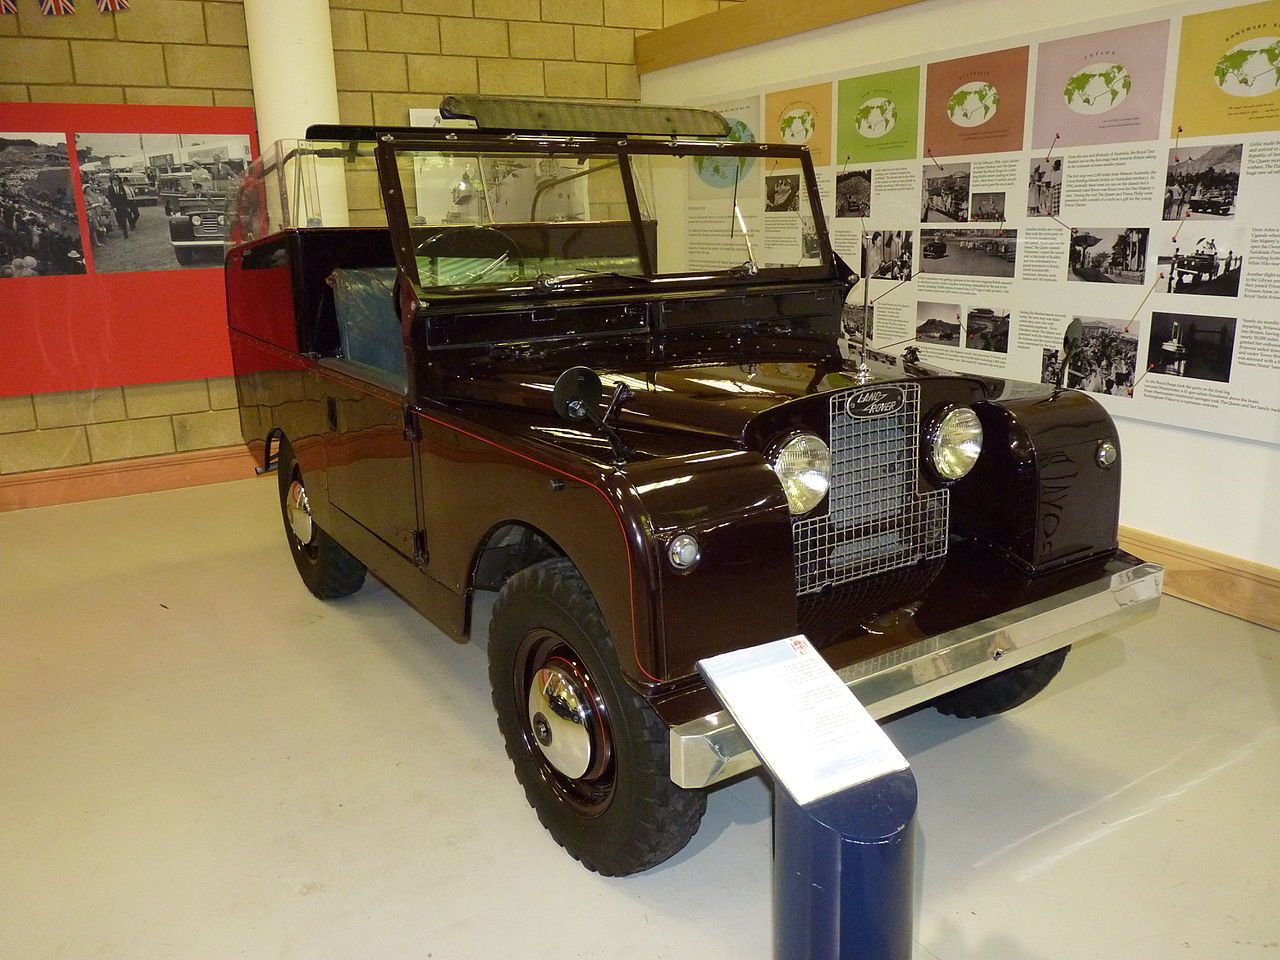 1953 Land Rover (State Royal Review Vehicle) Former Royal Family Vehicle In A Museum